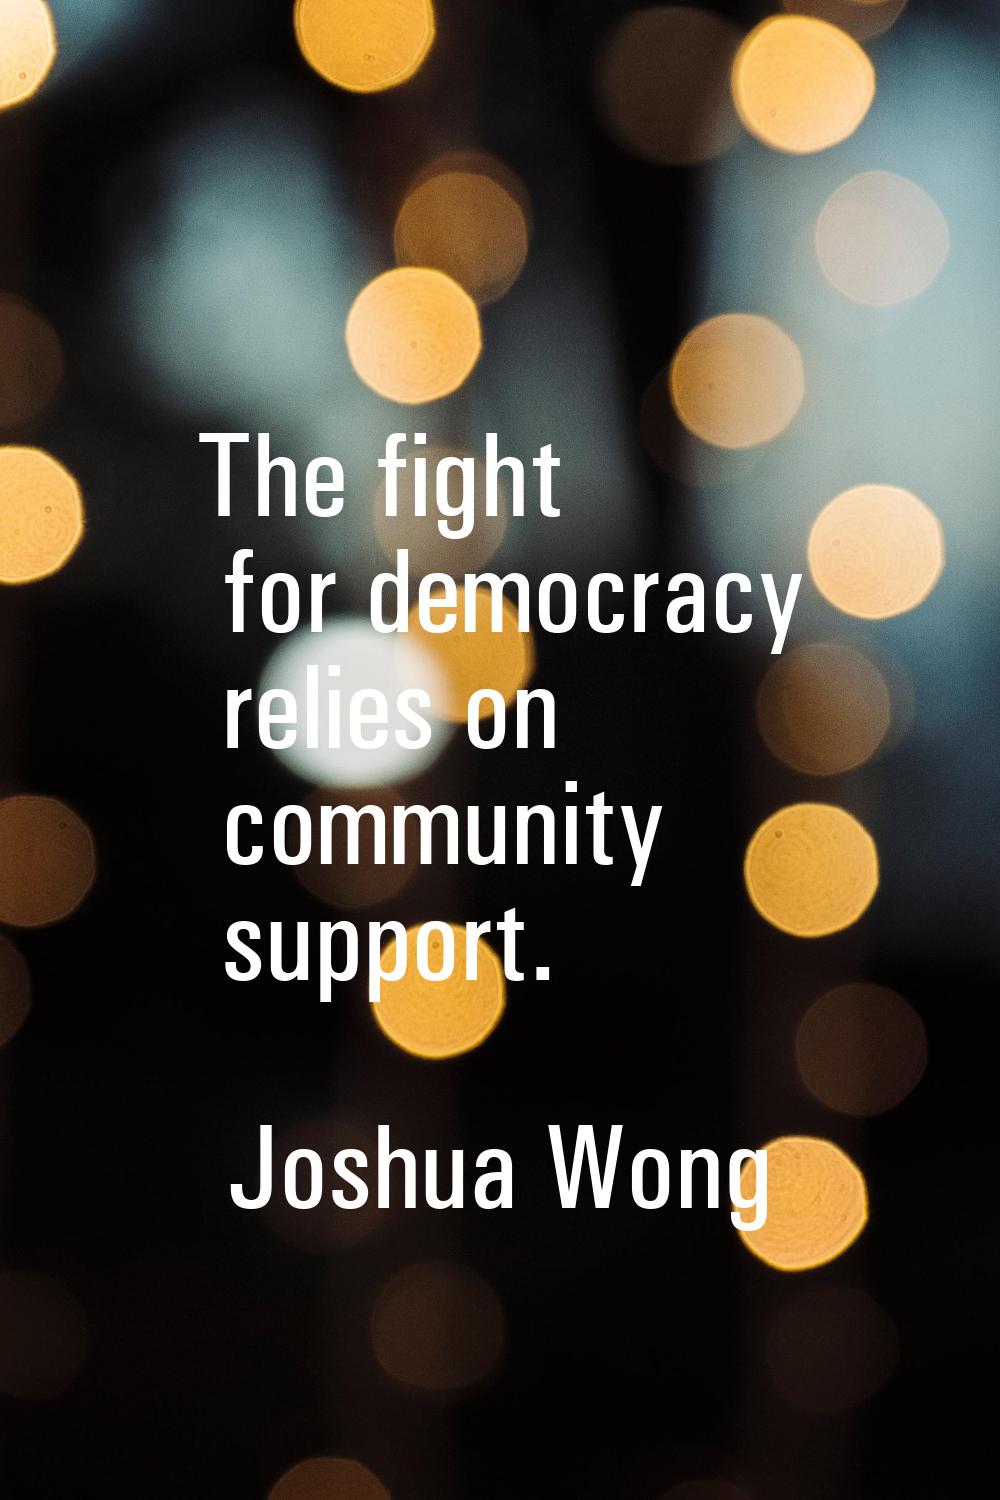 The fight for democracy relies on community support.